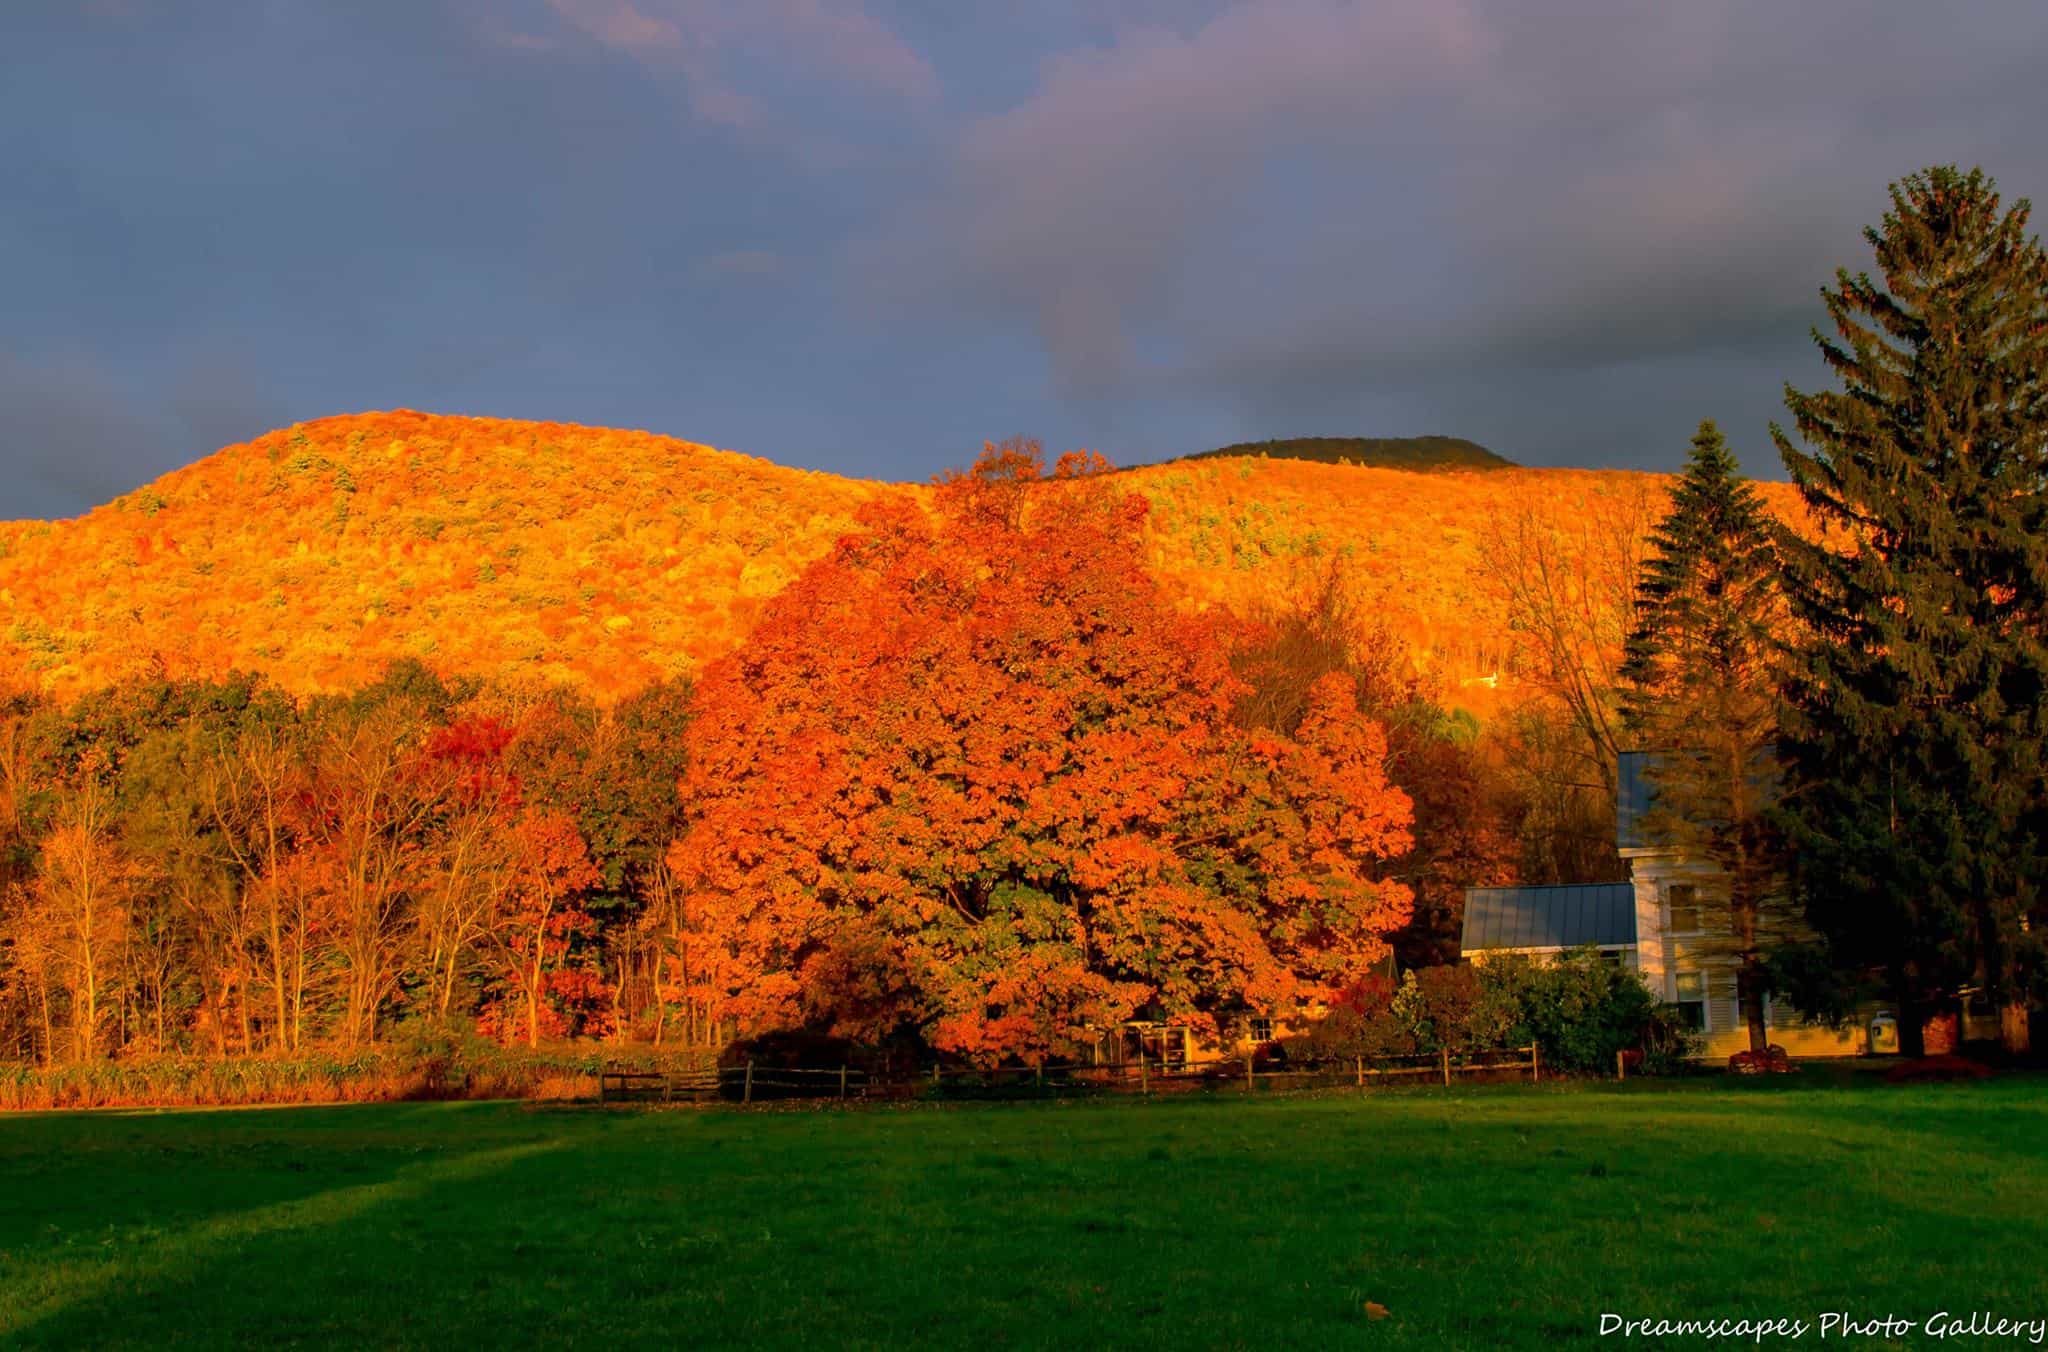 A stunning autumnal landscape bathed in golden sunset light, highlighting the fiery hues of fall foliage on a hillside in Vermont, evoking the warmth and tranquility of the season